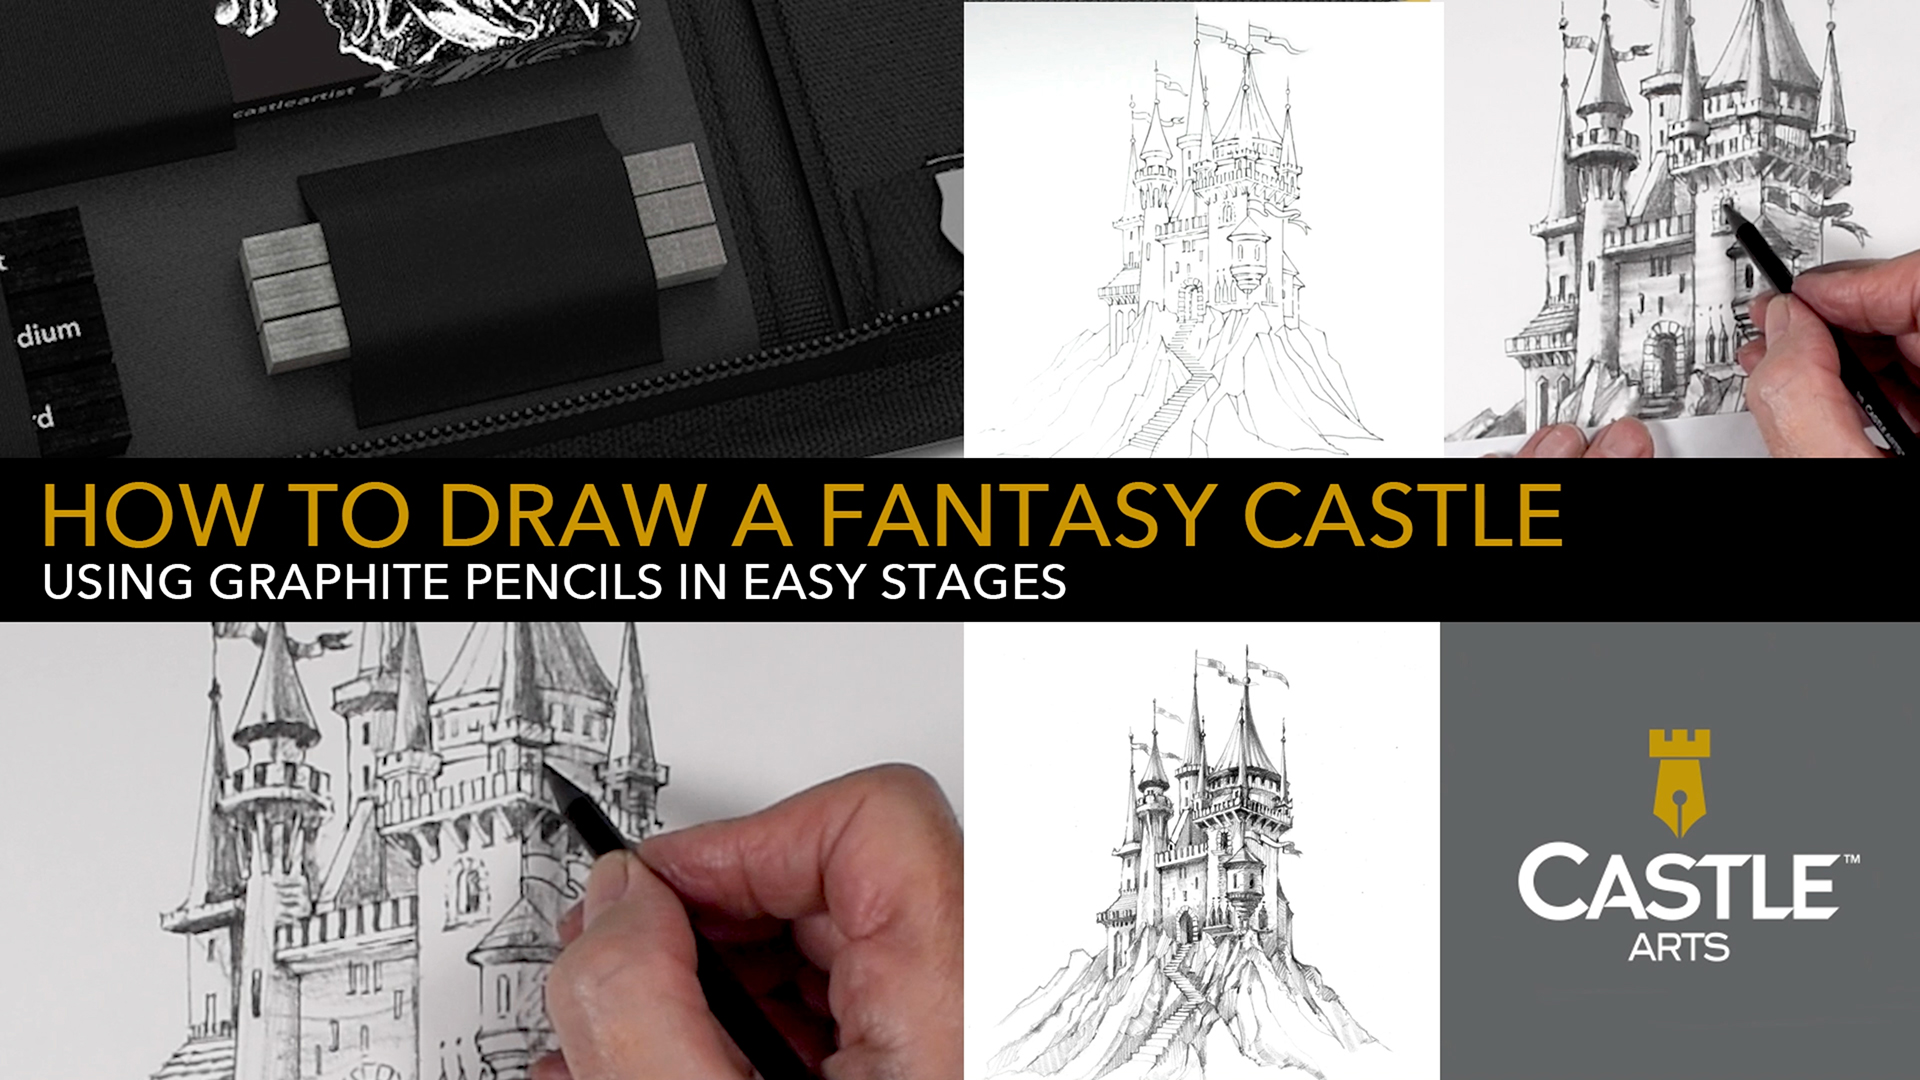 Disneyland Castle Sketch by Torch Creative on Dribbble